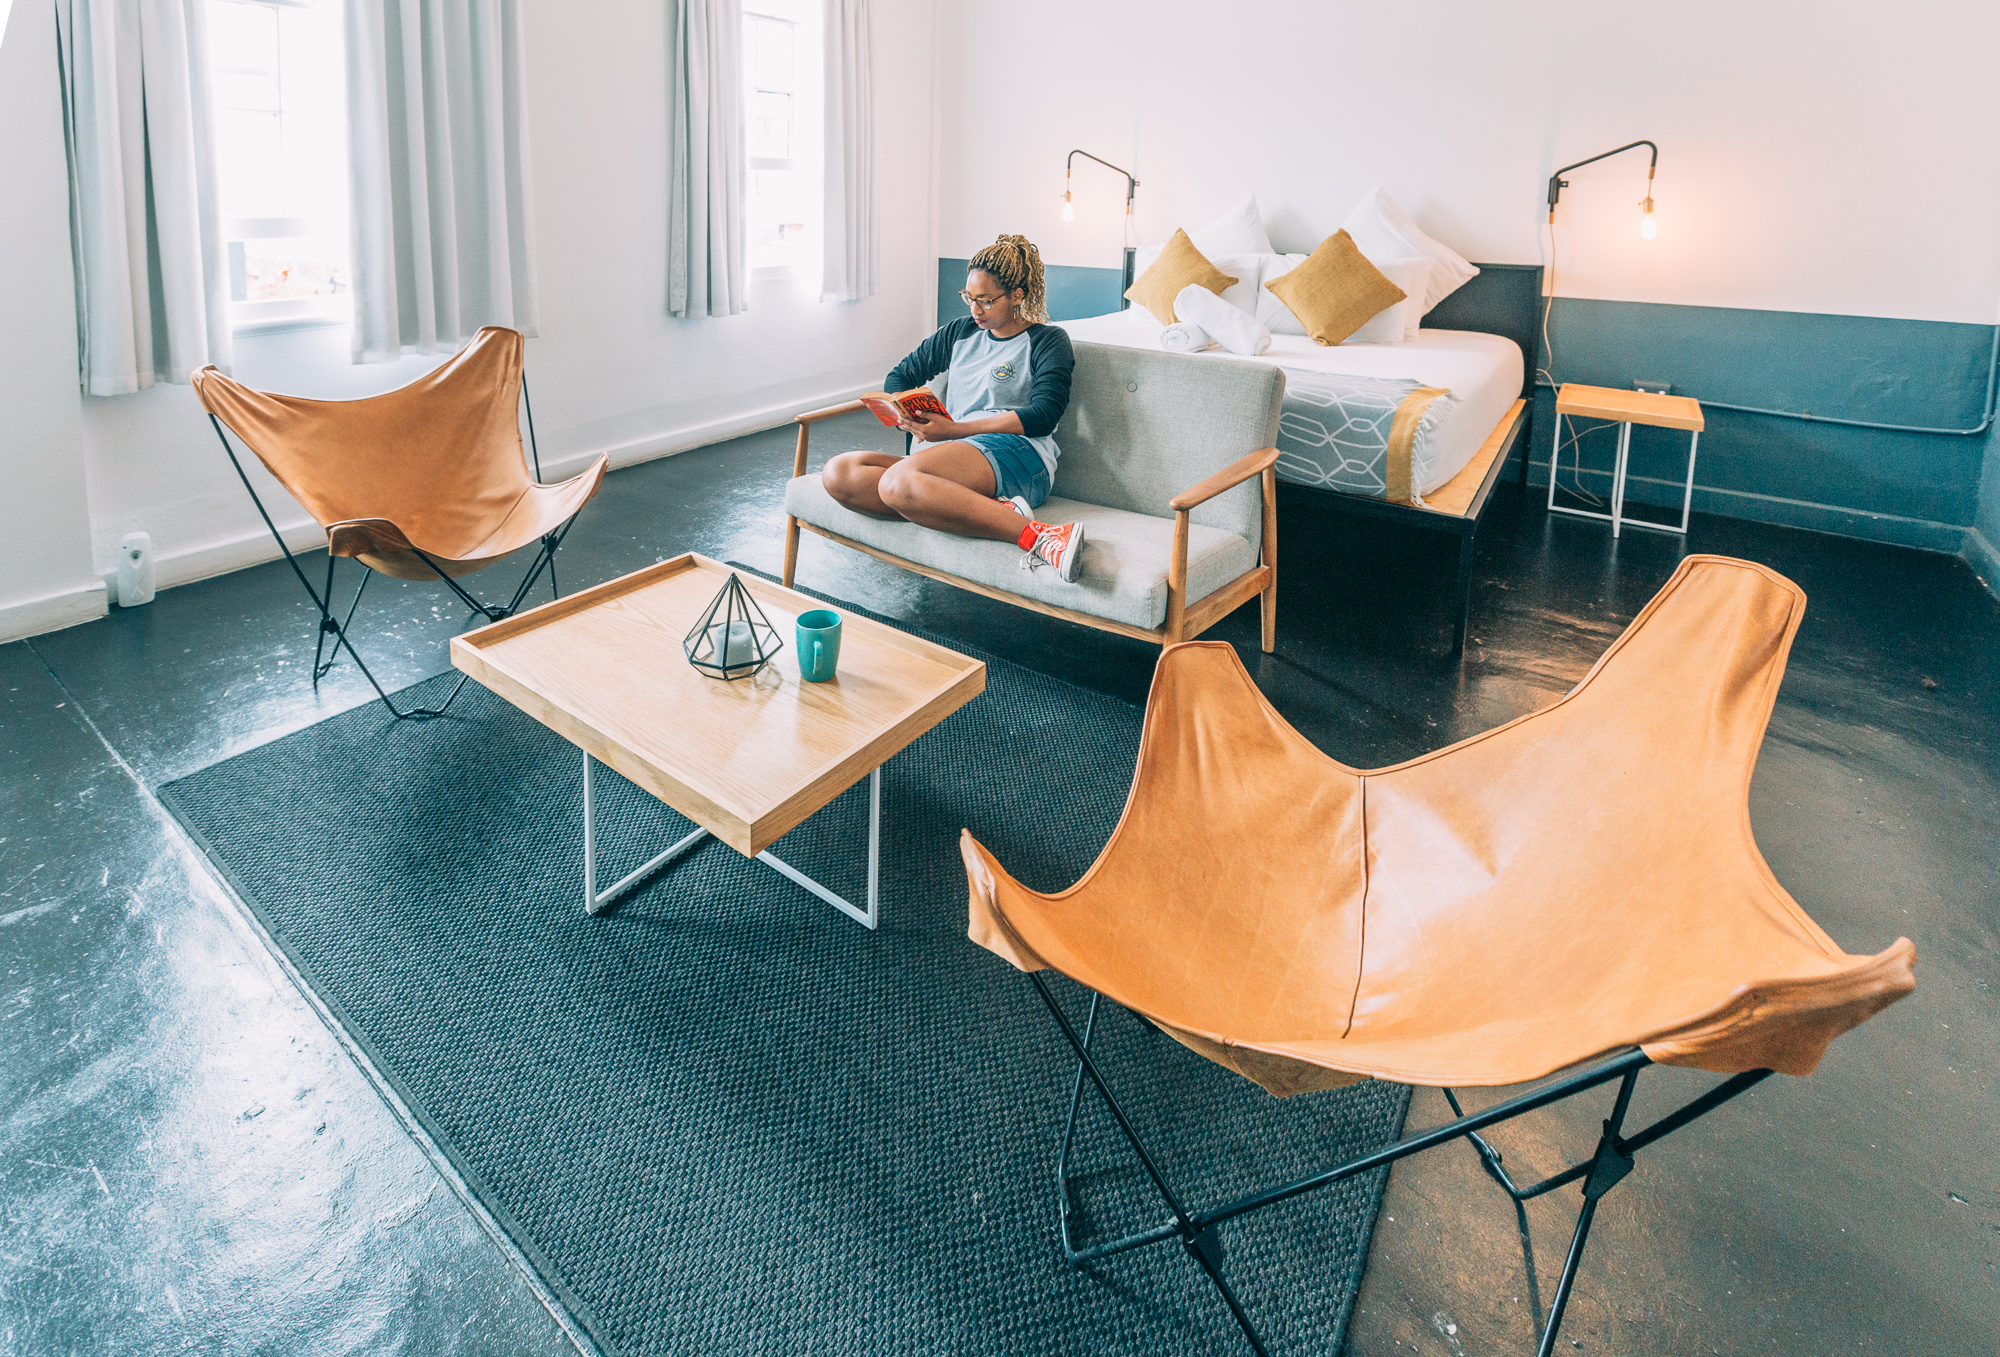 Here's why the future of the hospitality industry looks a lot like a hostel...